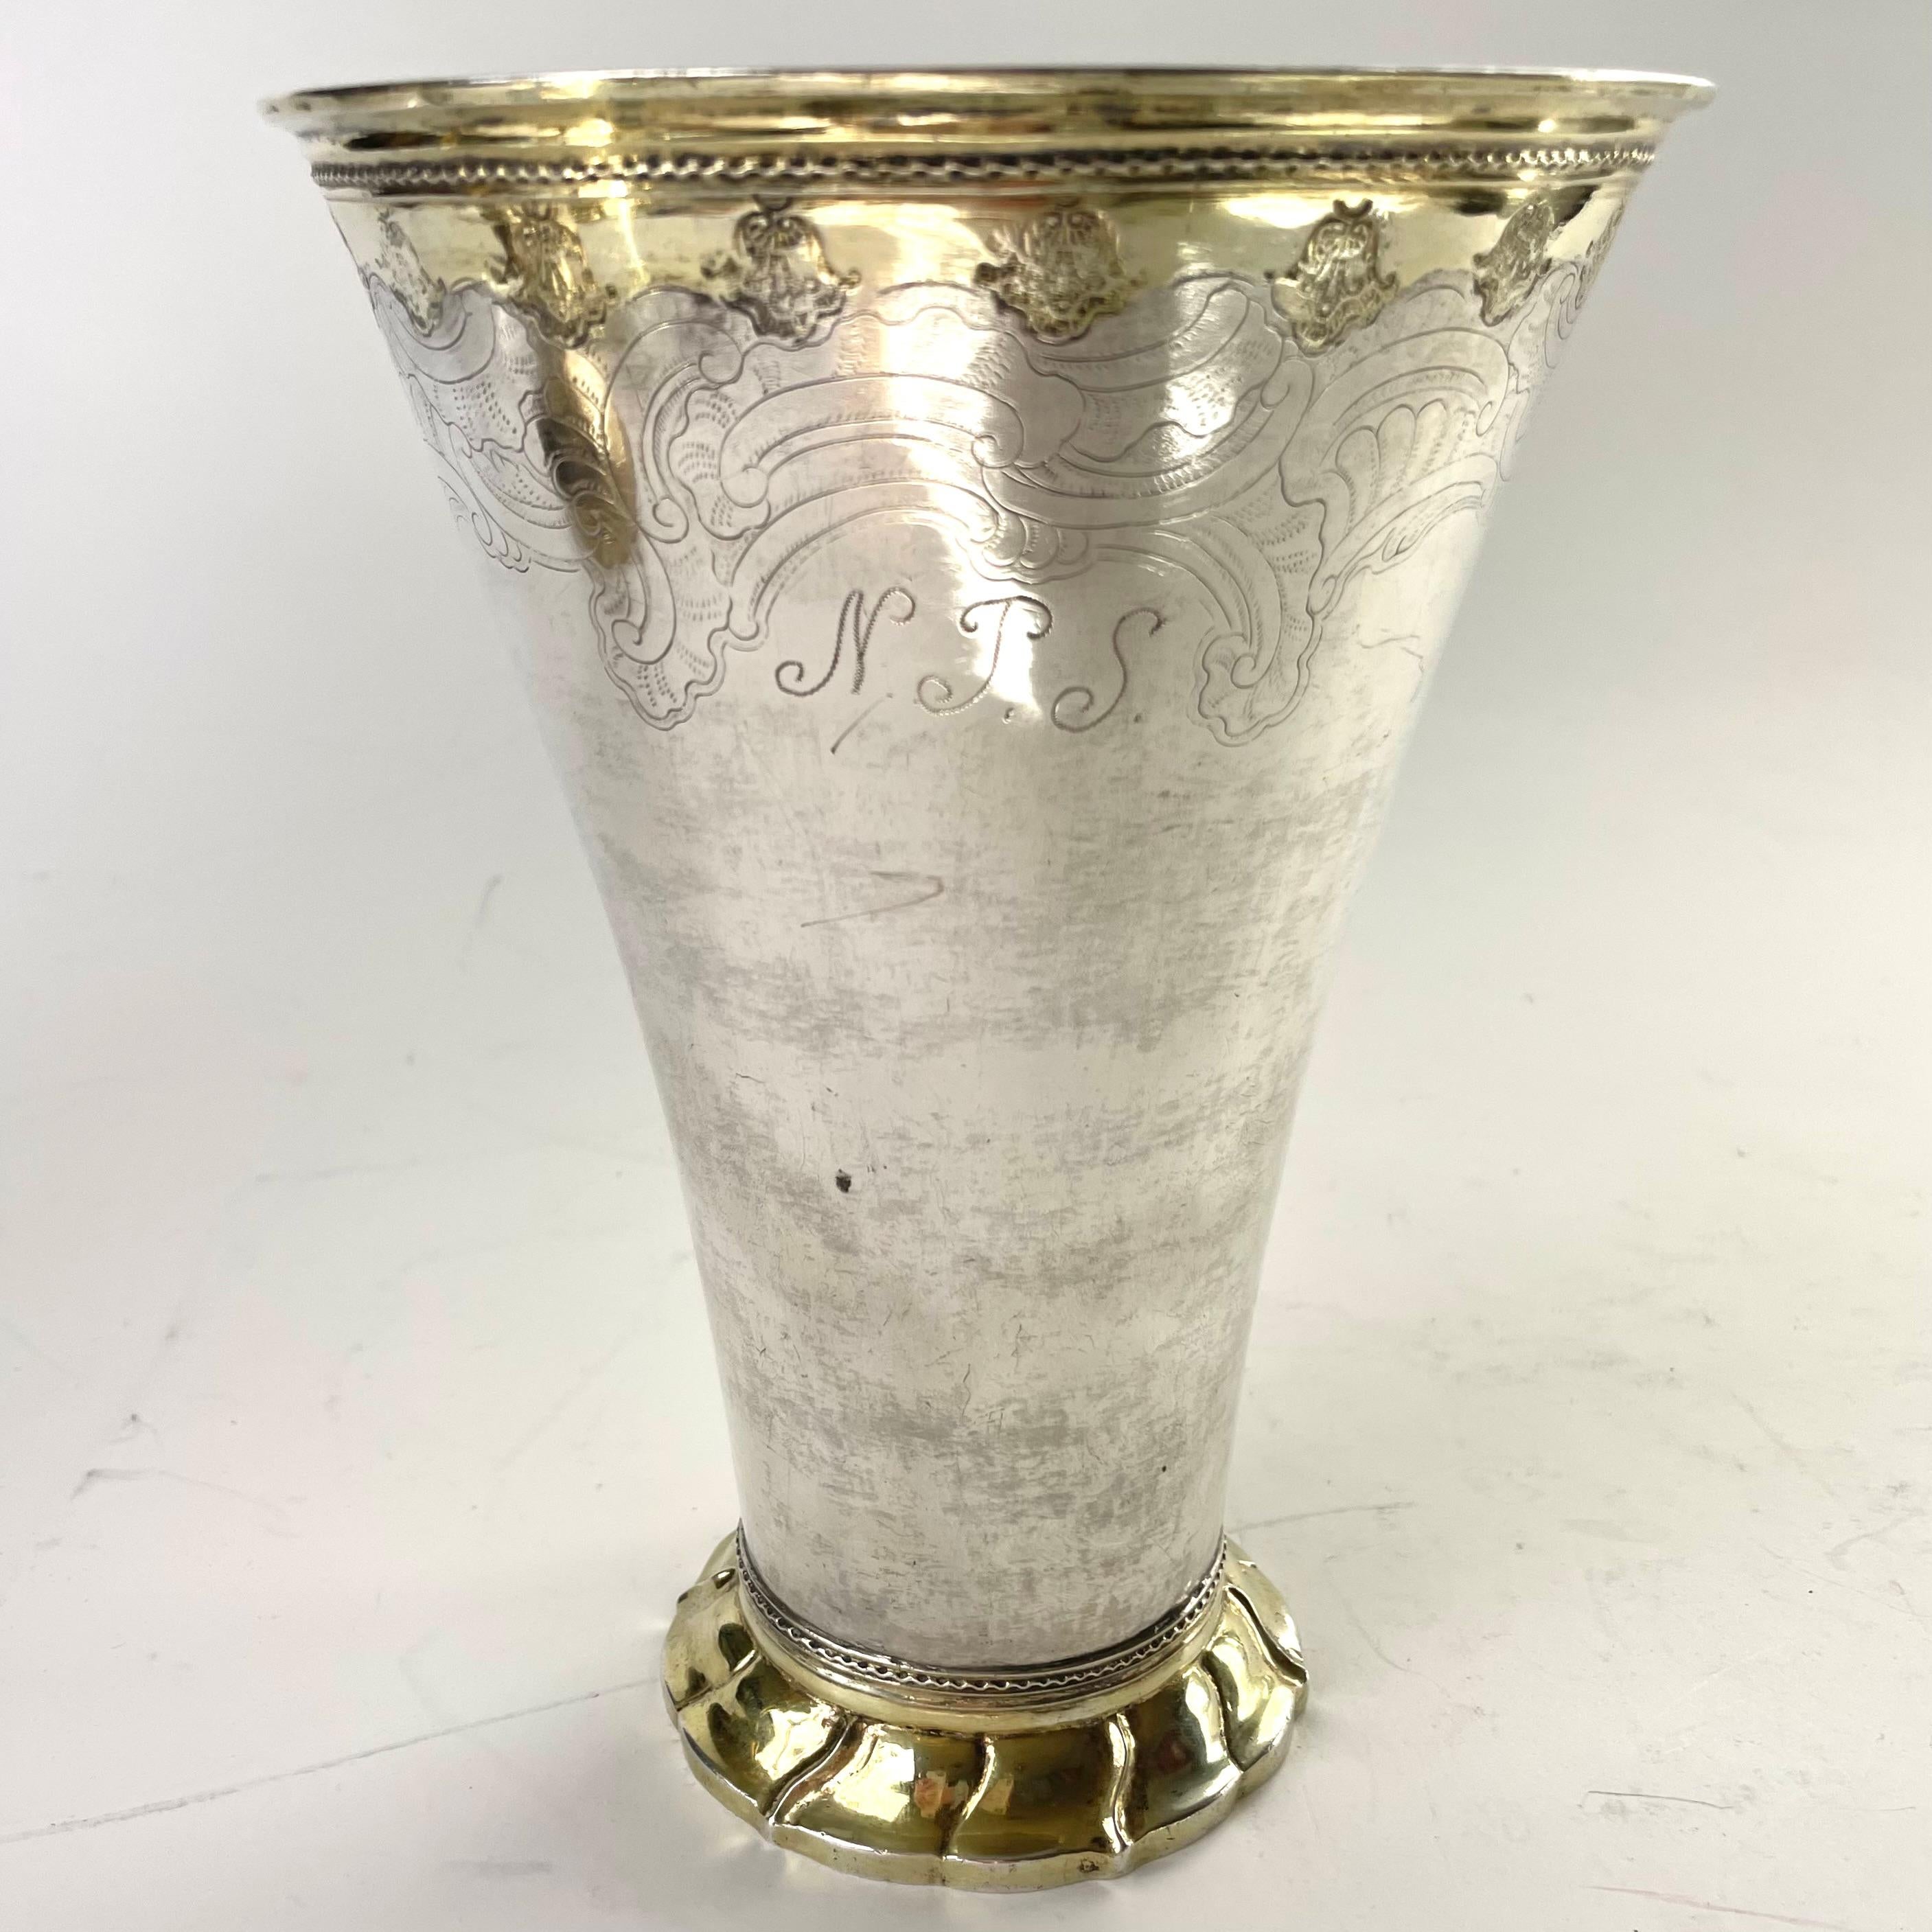 Gilt Goblet in Silver, partly gilded. Rococo by S. Westerstråhle the elder from 1765